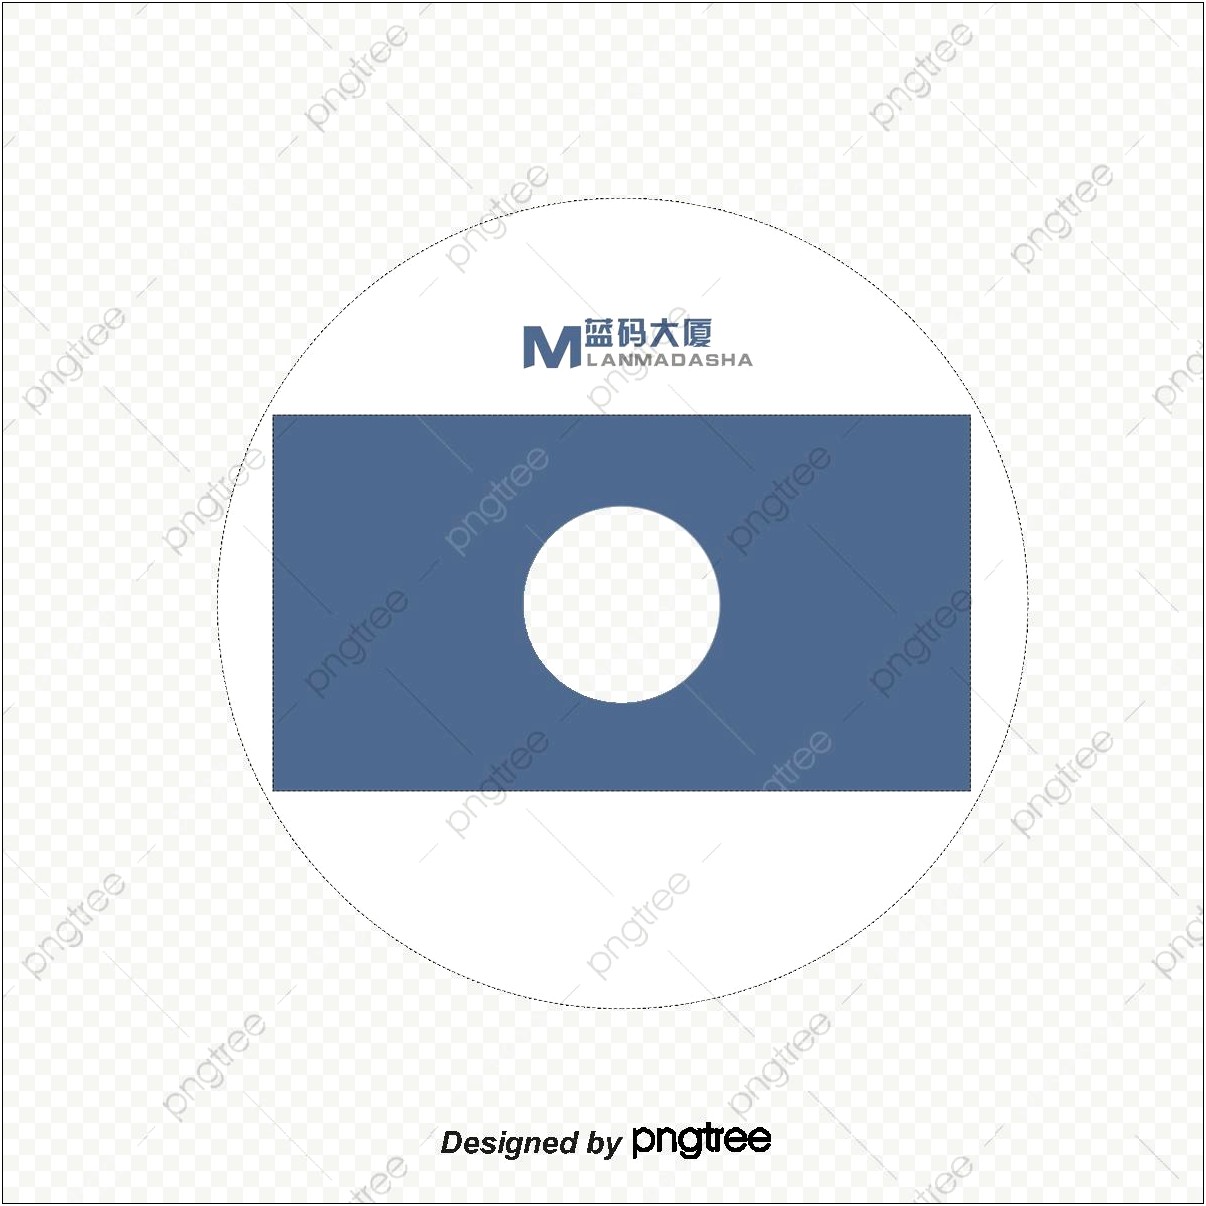 Download The Cd Label Artwork Template